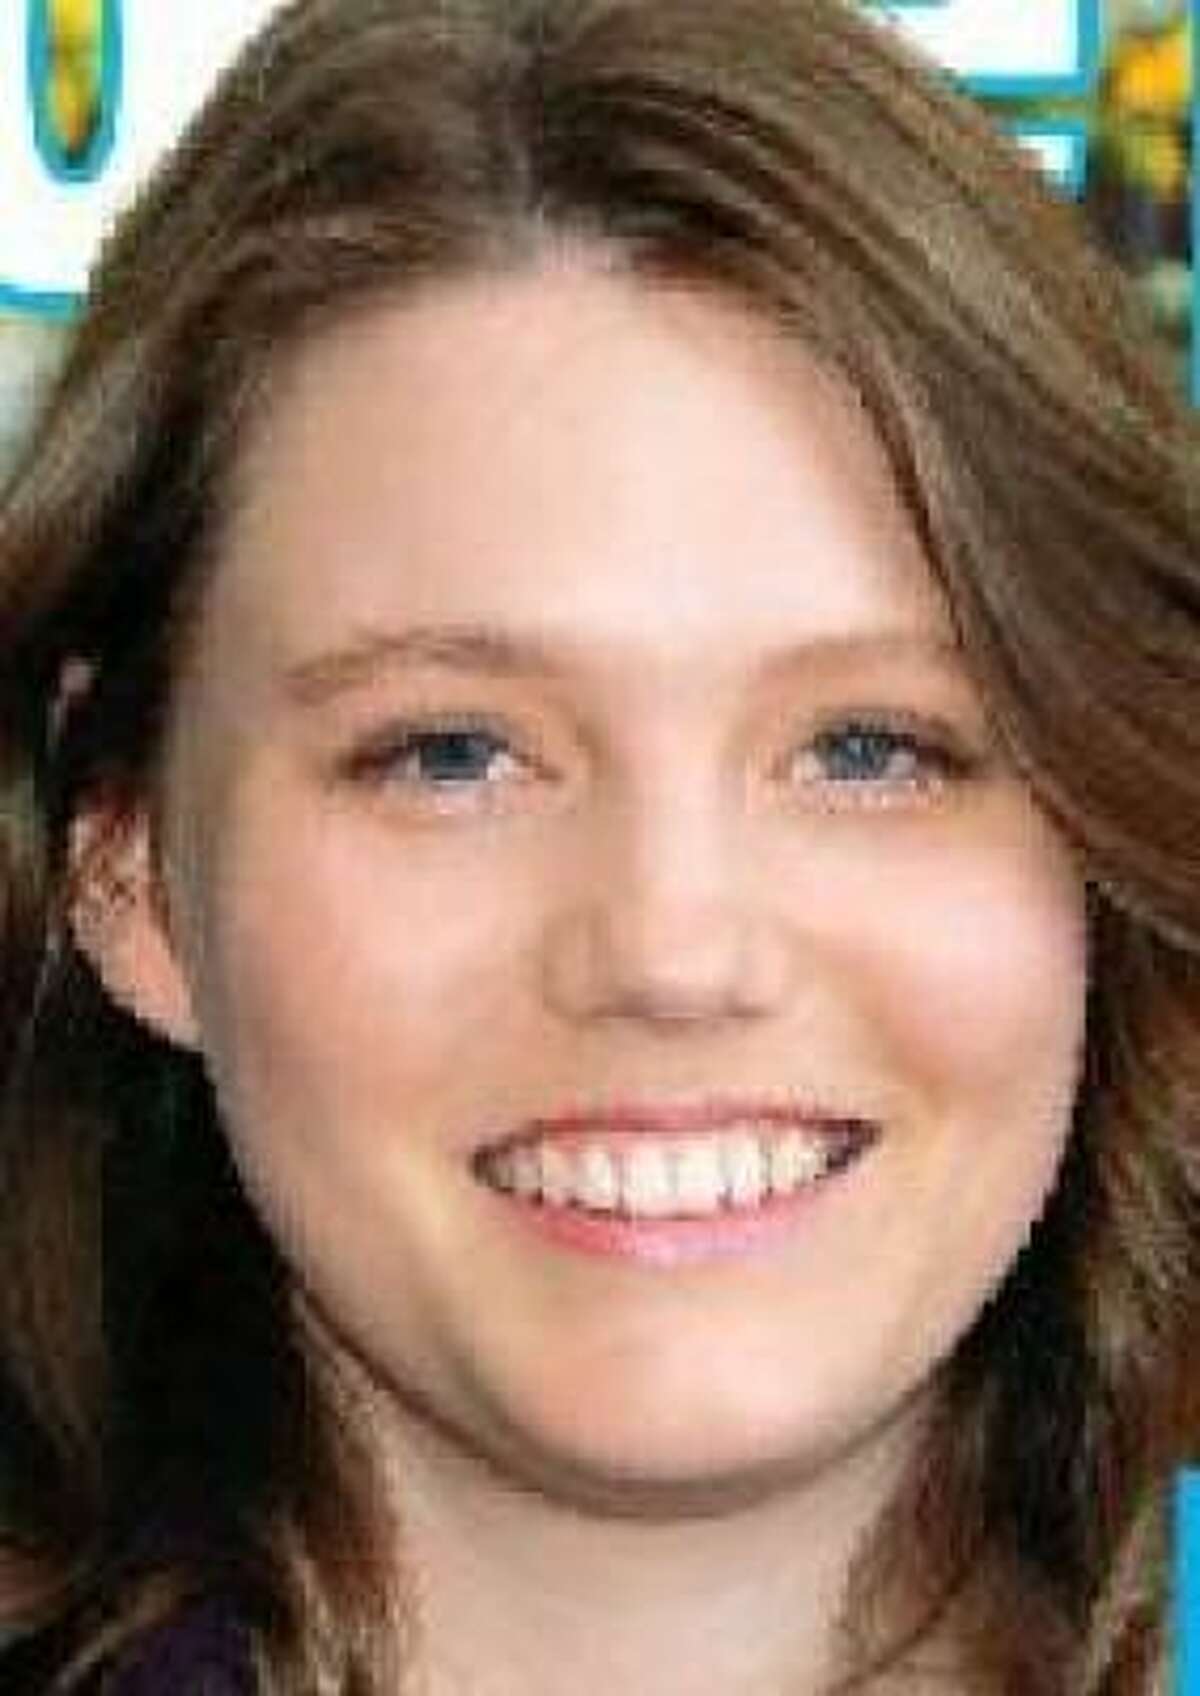 Calif. deal giving abducted victim Jaycee Dugard 20 million